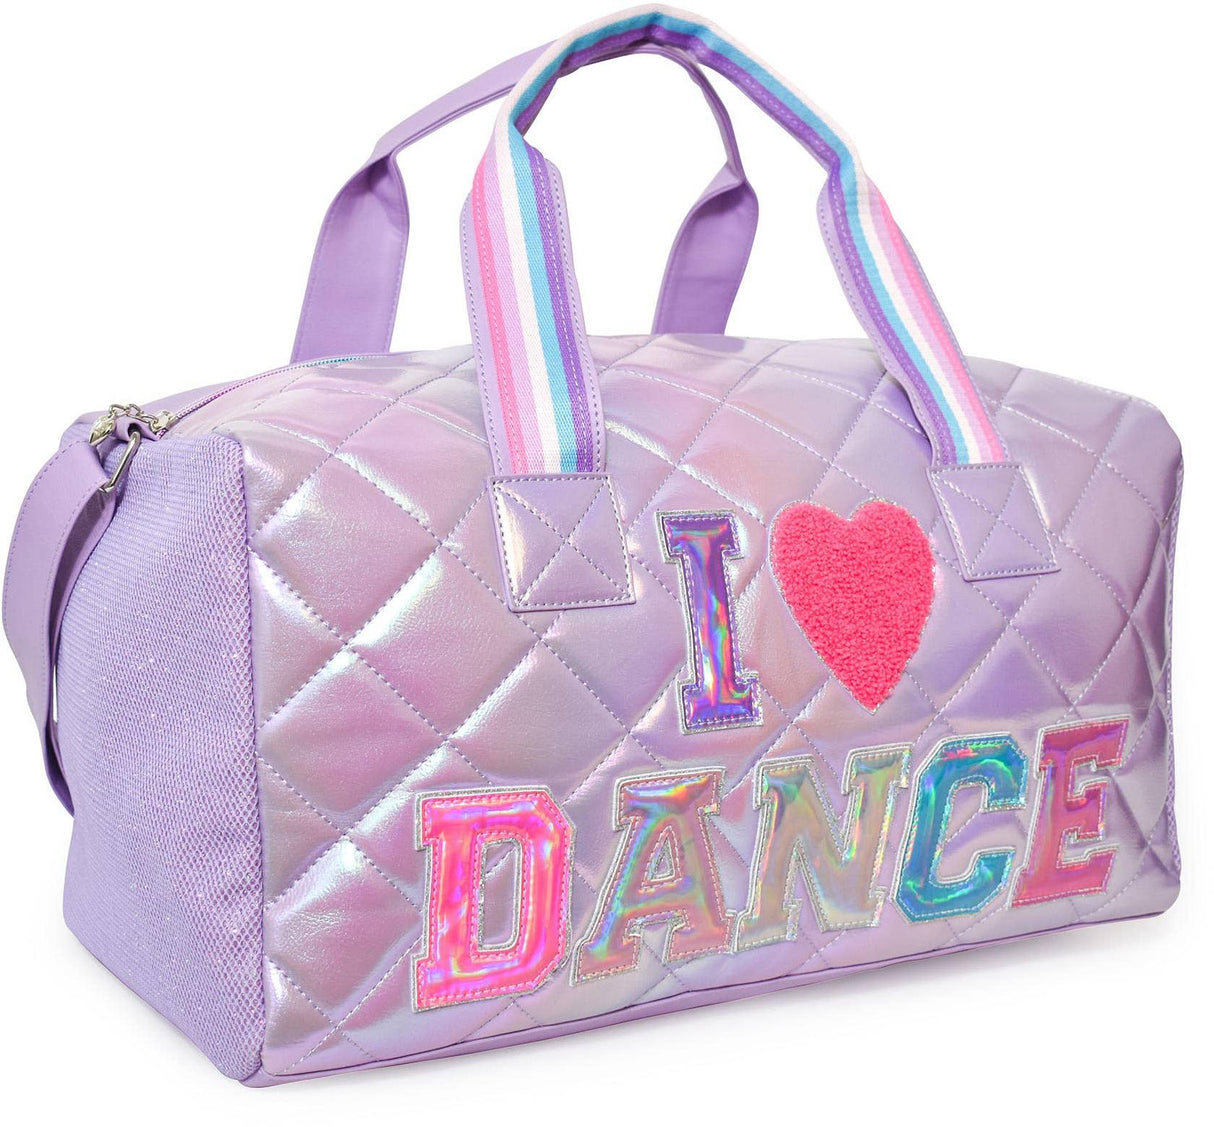 OMG Quilted I 💗 Dance Lavender Metallic Large Duffle Bag - DNC-DF86